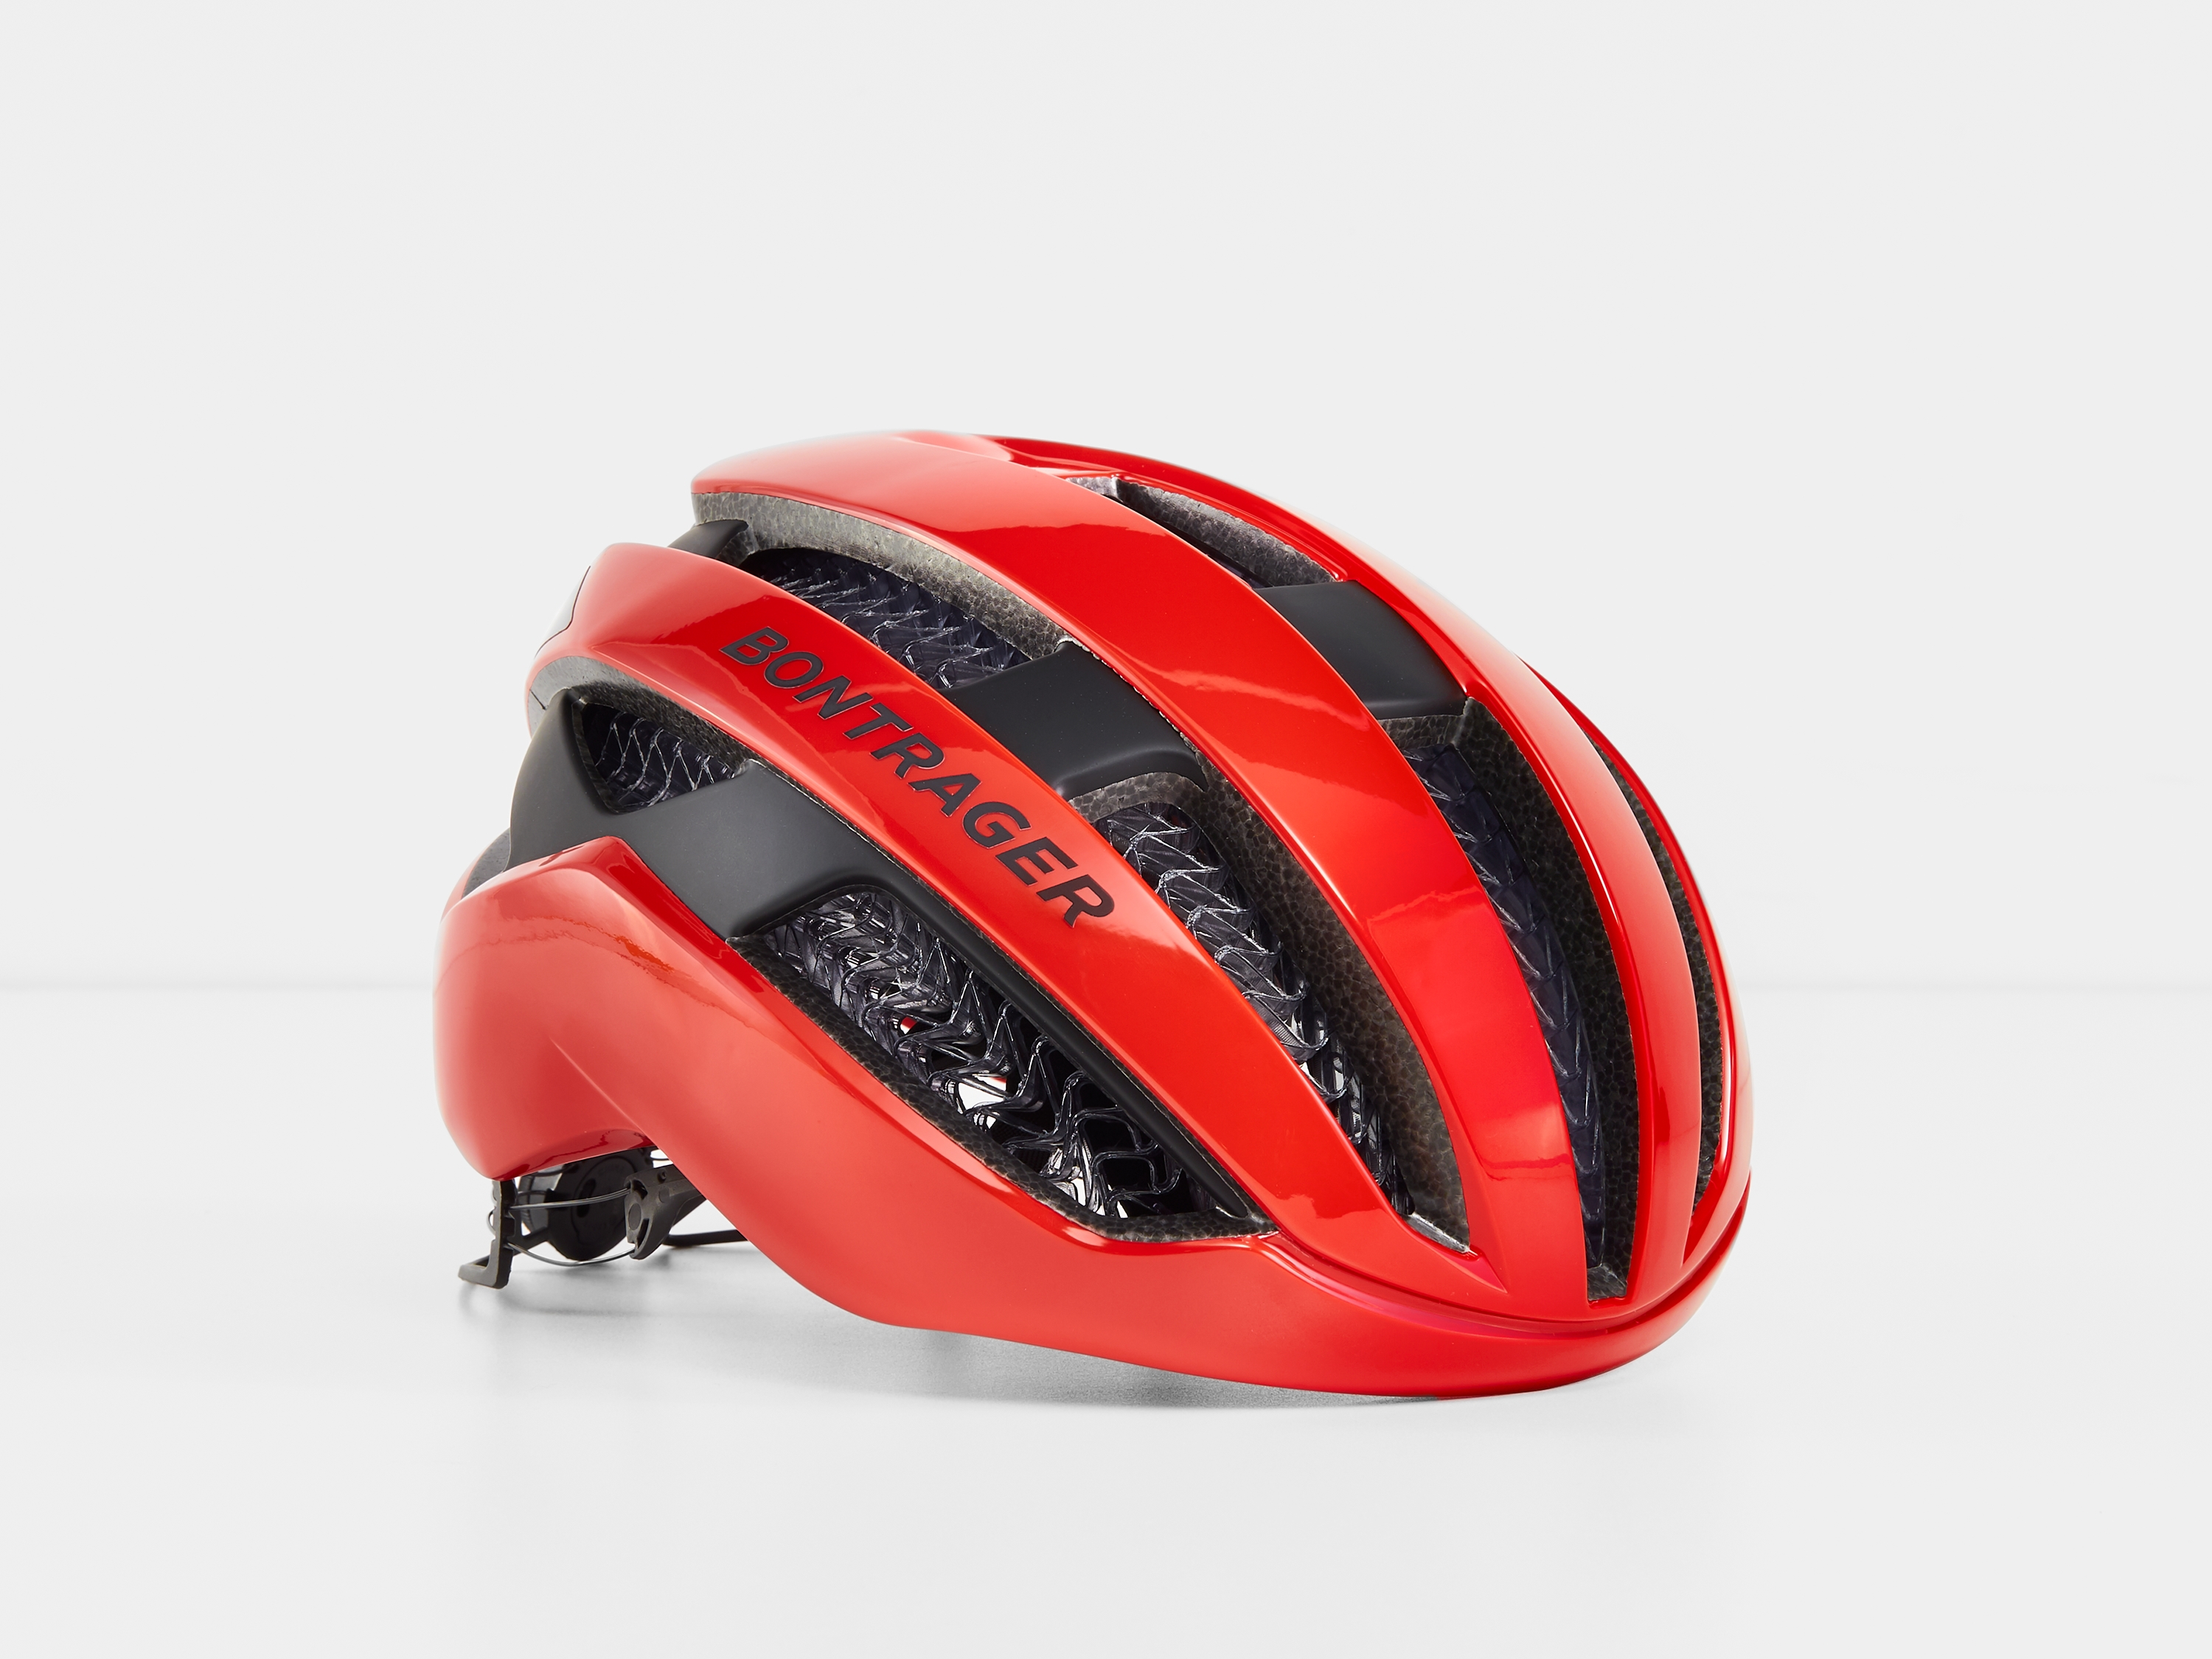 <a href="https://cycles-clement.be/product/casque-bont-circuit-wavece-m-rouge/">CASQUE BONT CIRCUIT WAVECE  M ROUGE</a>